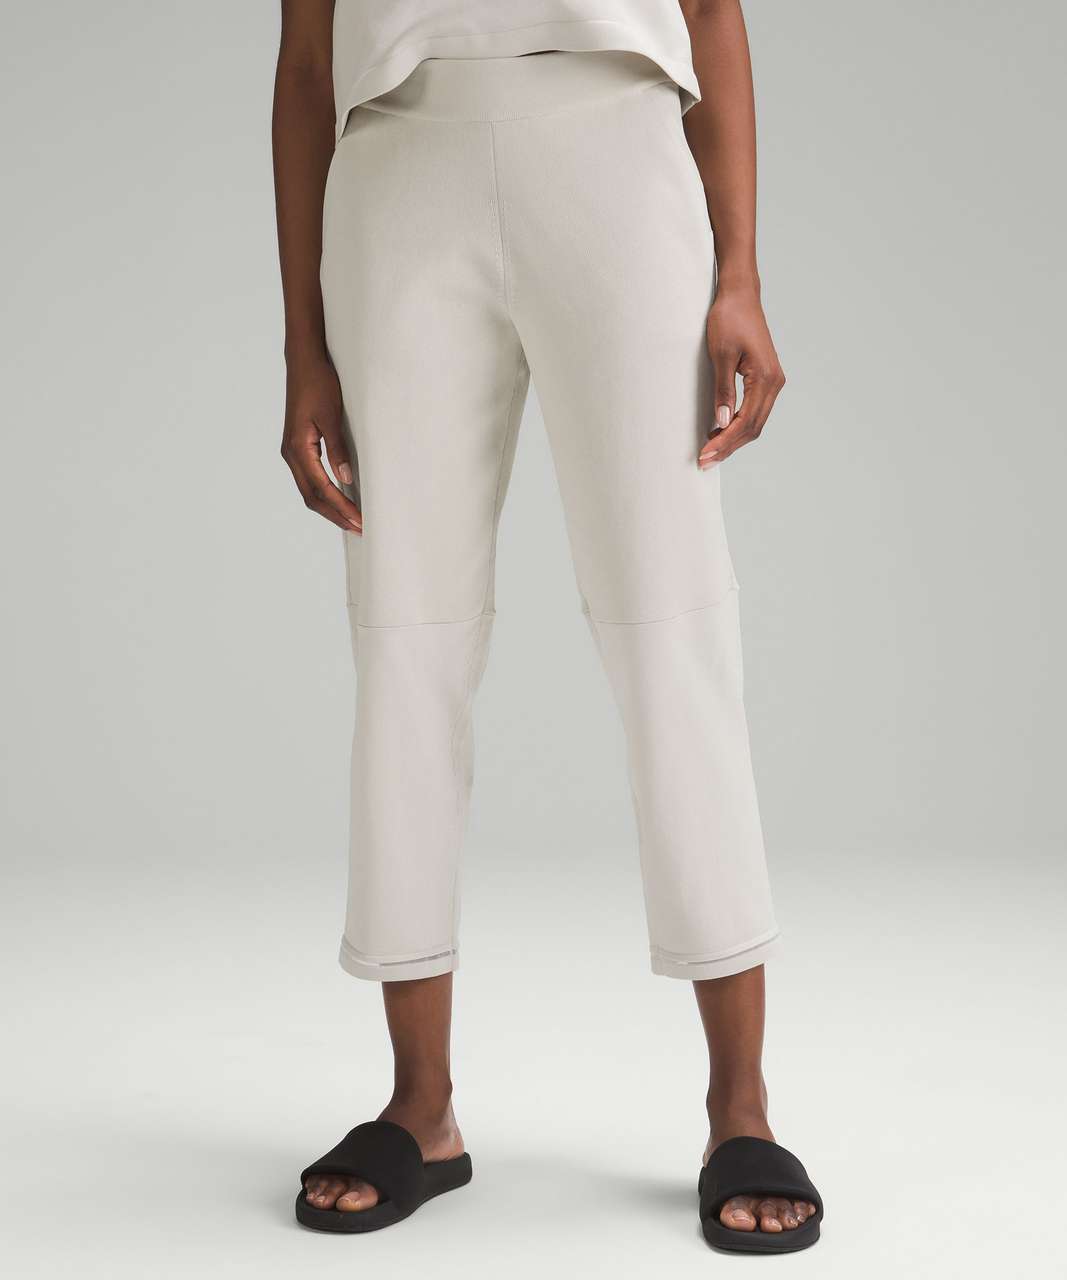 Lululemon Relaxed-Fit High-Rise Knit Cropped Pants 24" - Bone